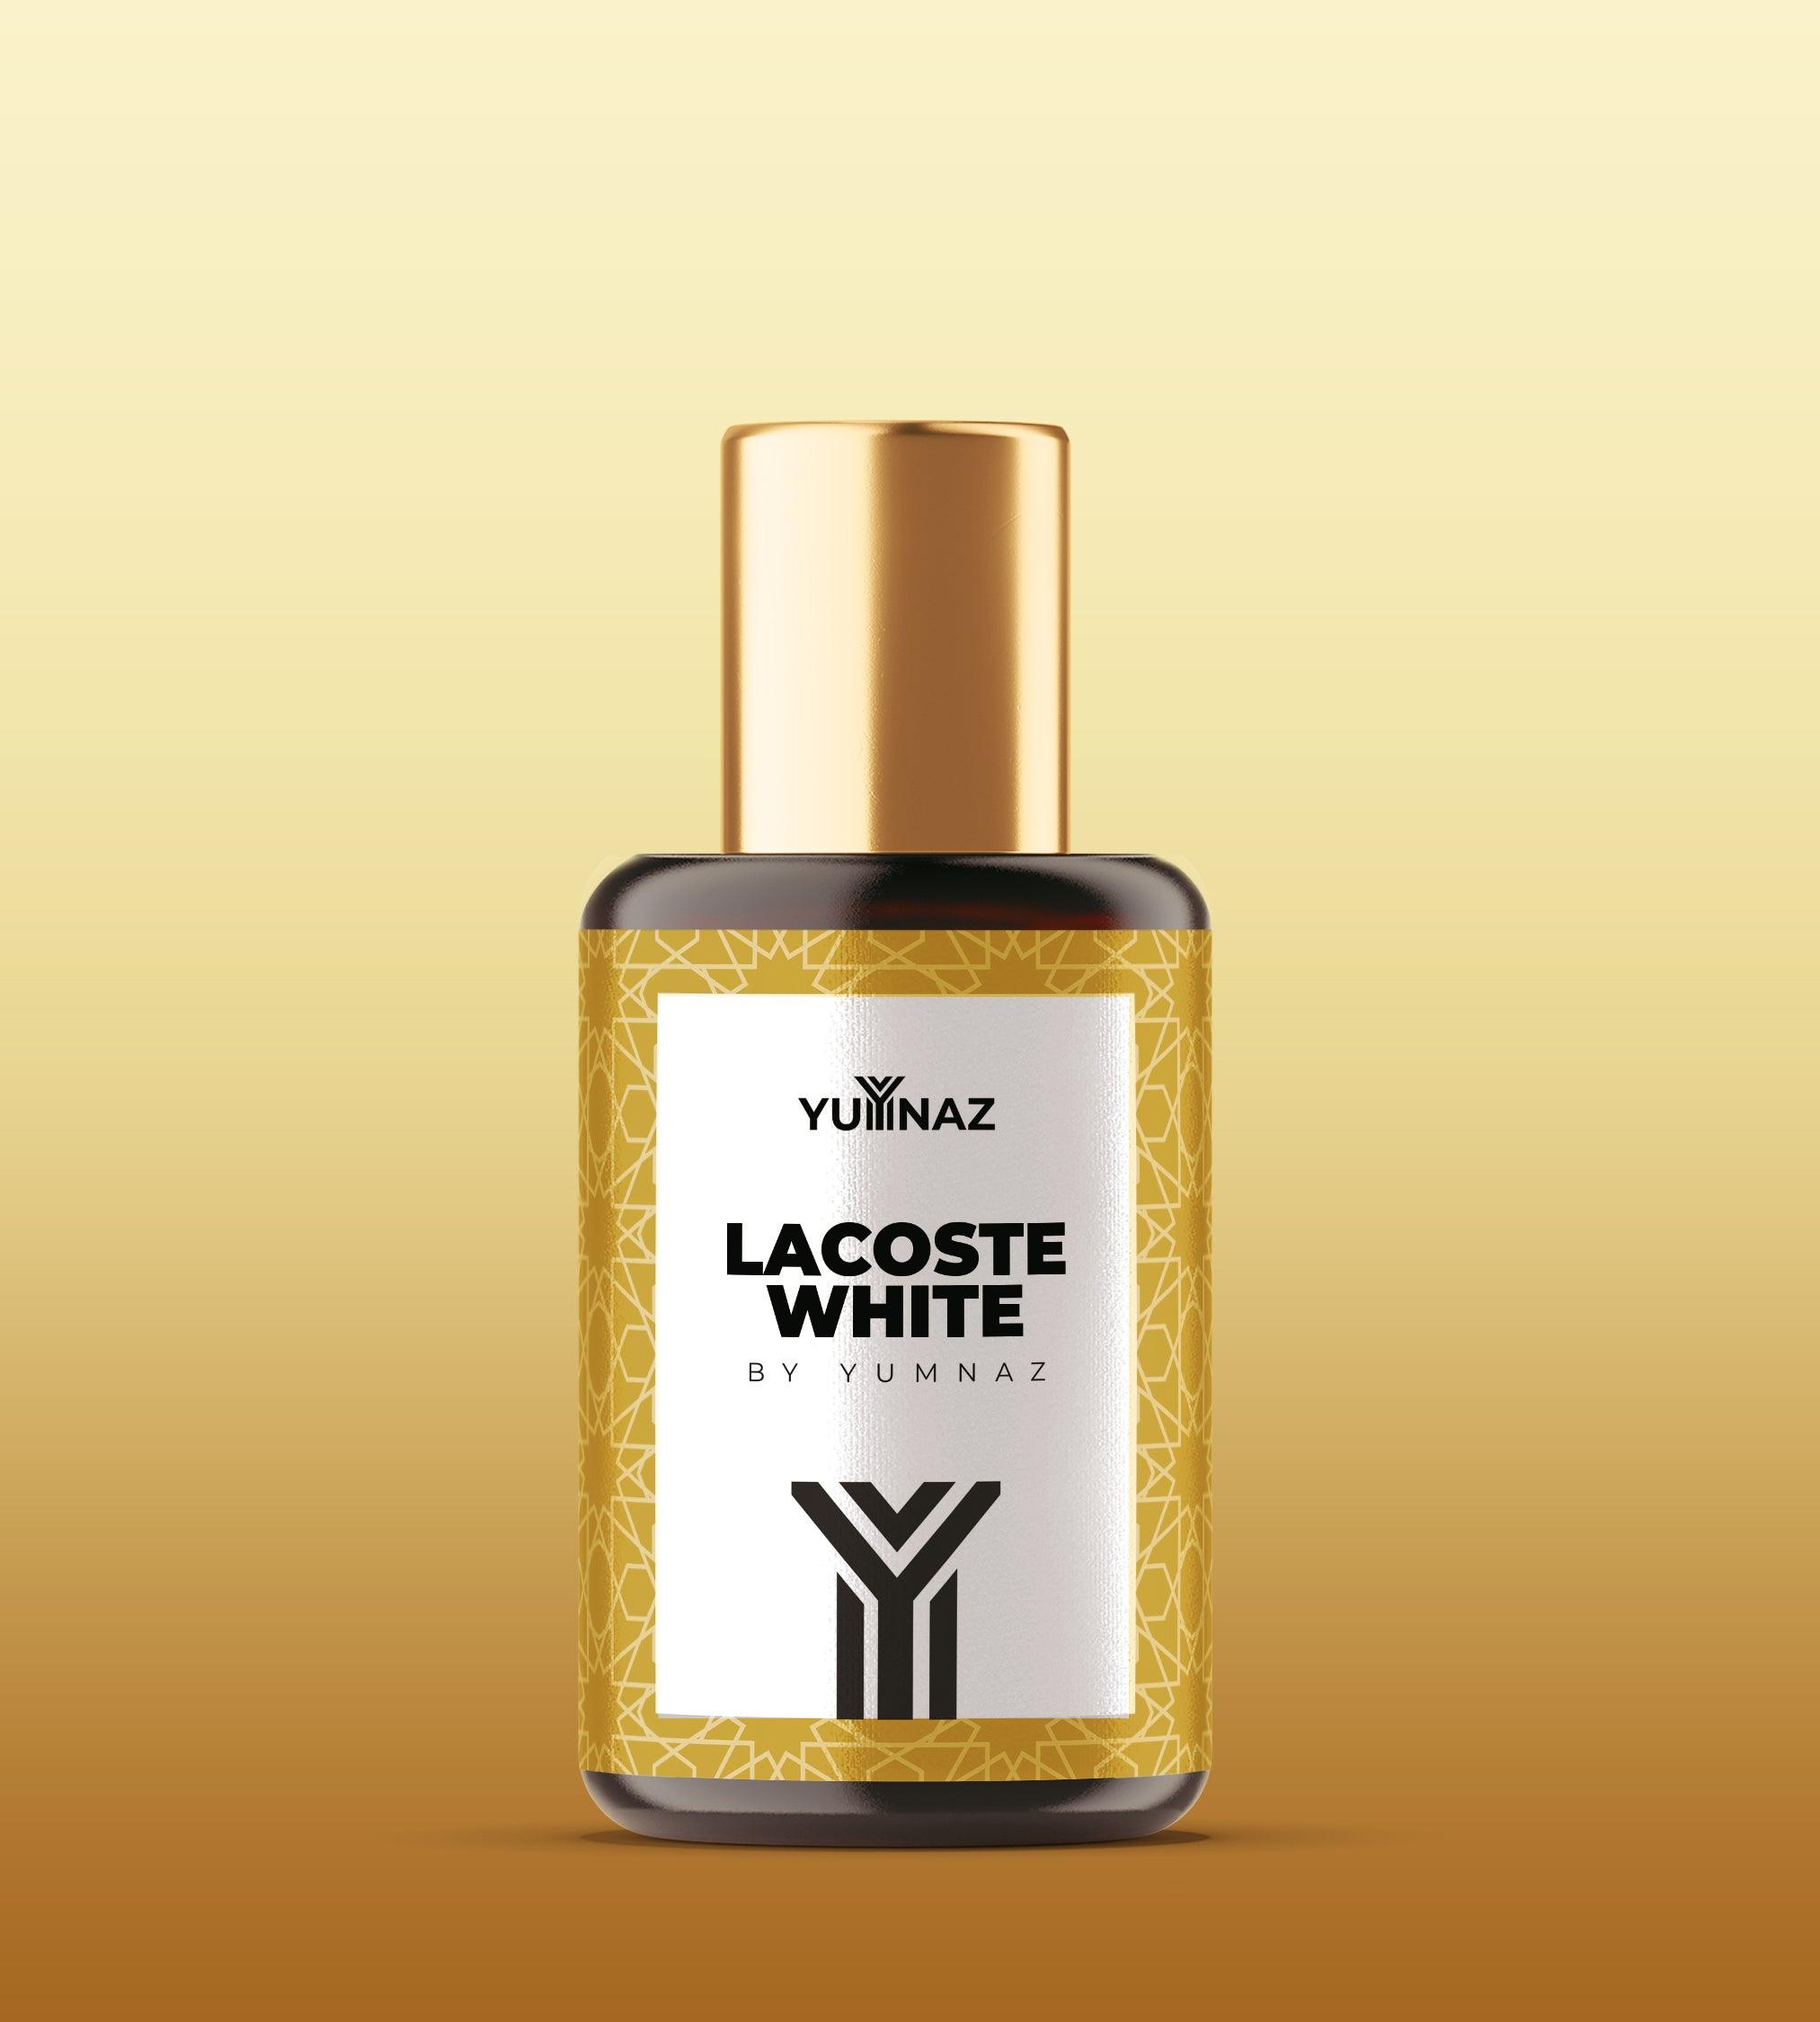 Get the Lacoste White Perfume on a reasonable Price in Pakistan